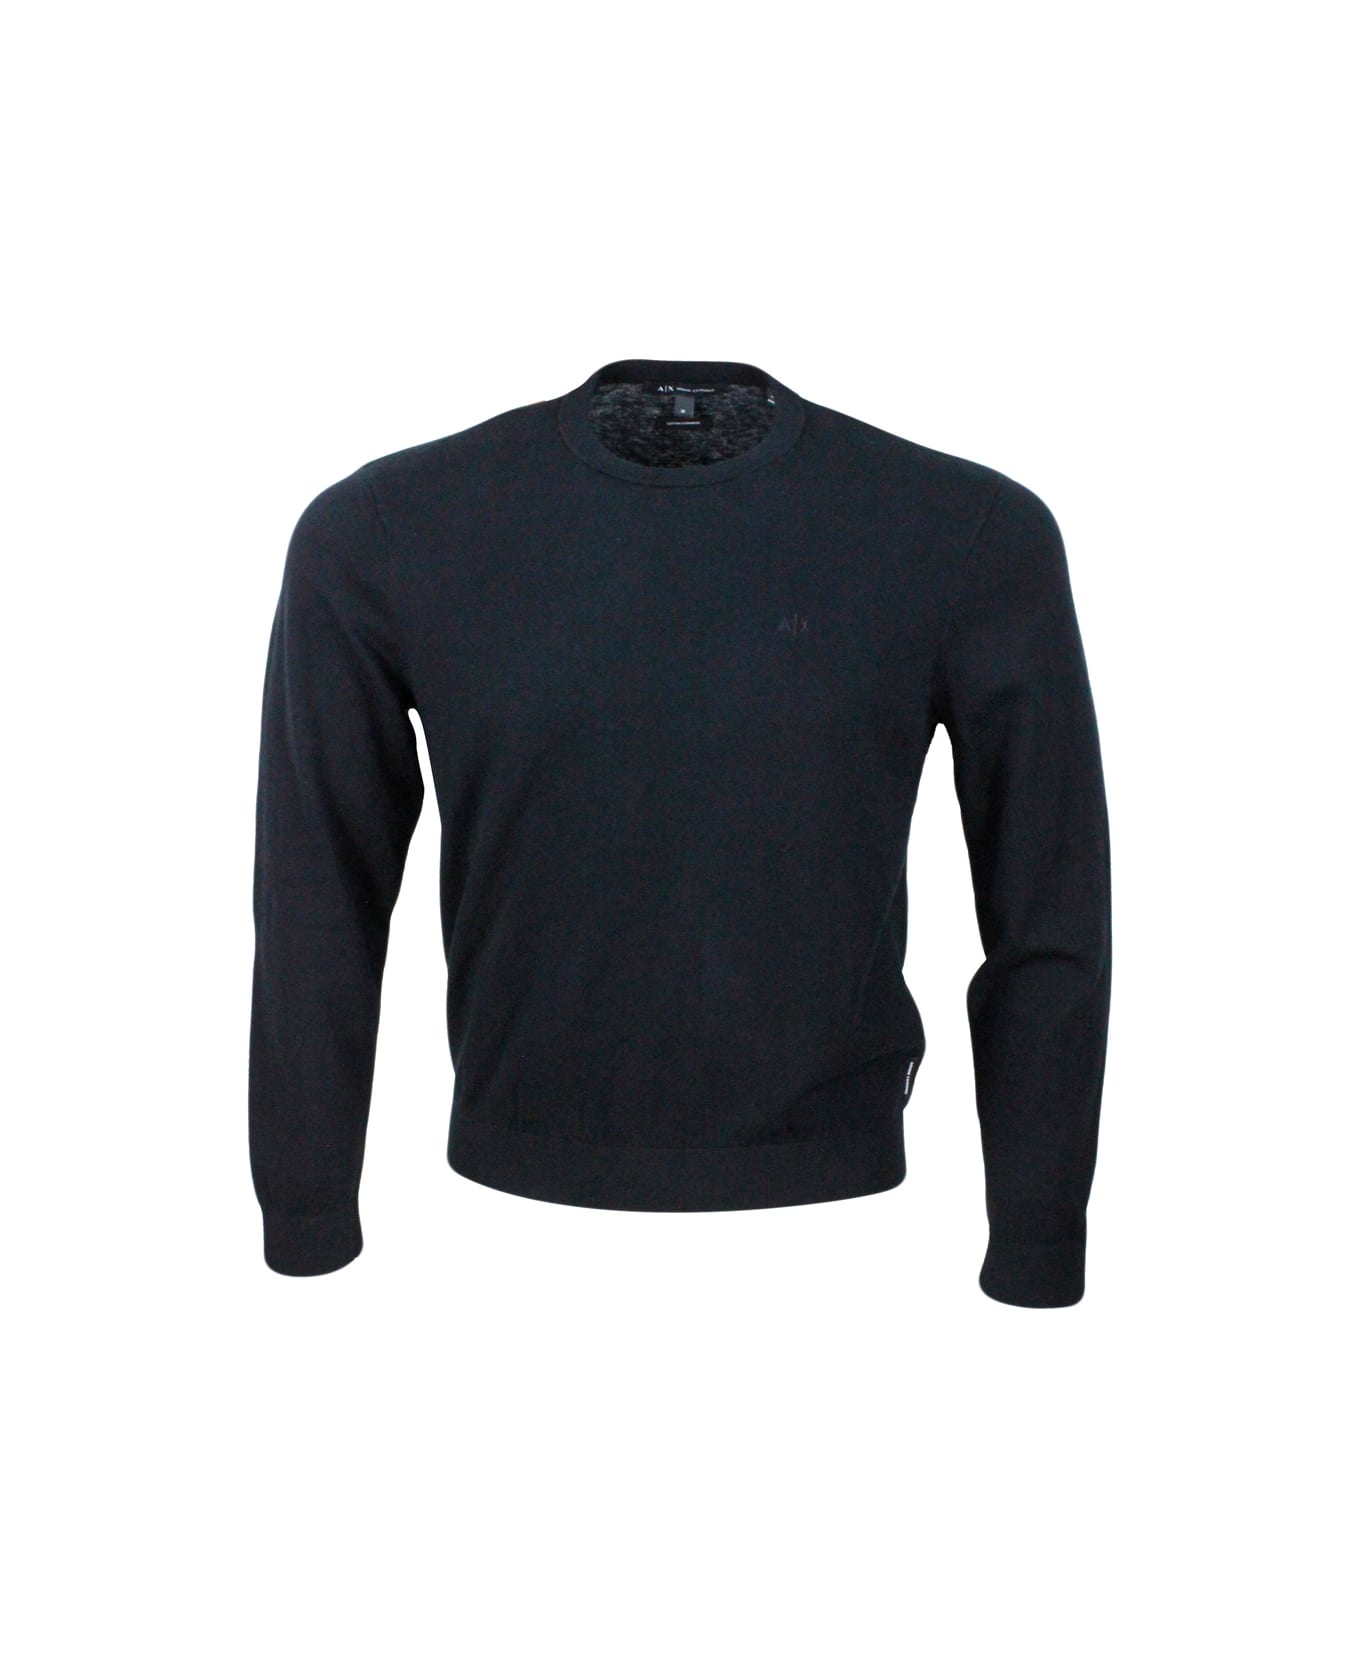 Armani Collezioni Lightweight Long-sleeved Crew-neck Sweater Made Of Warm Cotton And Cashmere With Contrasting Color Profiles At The Bottom And On The Cuffs - Black